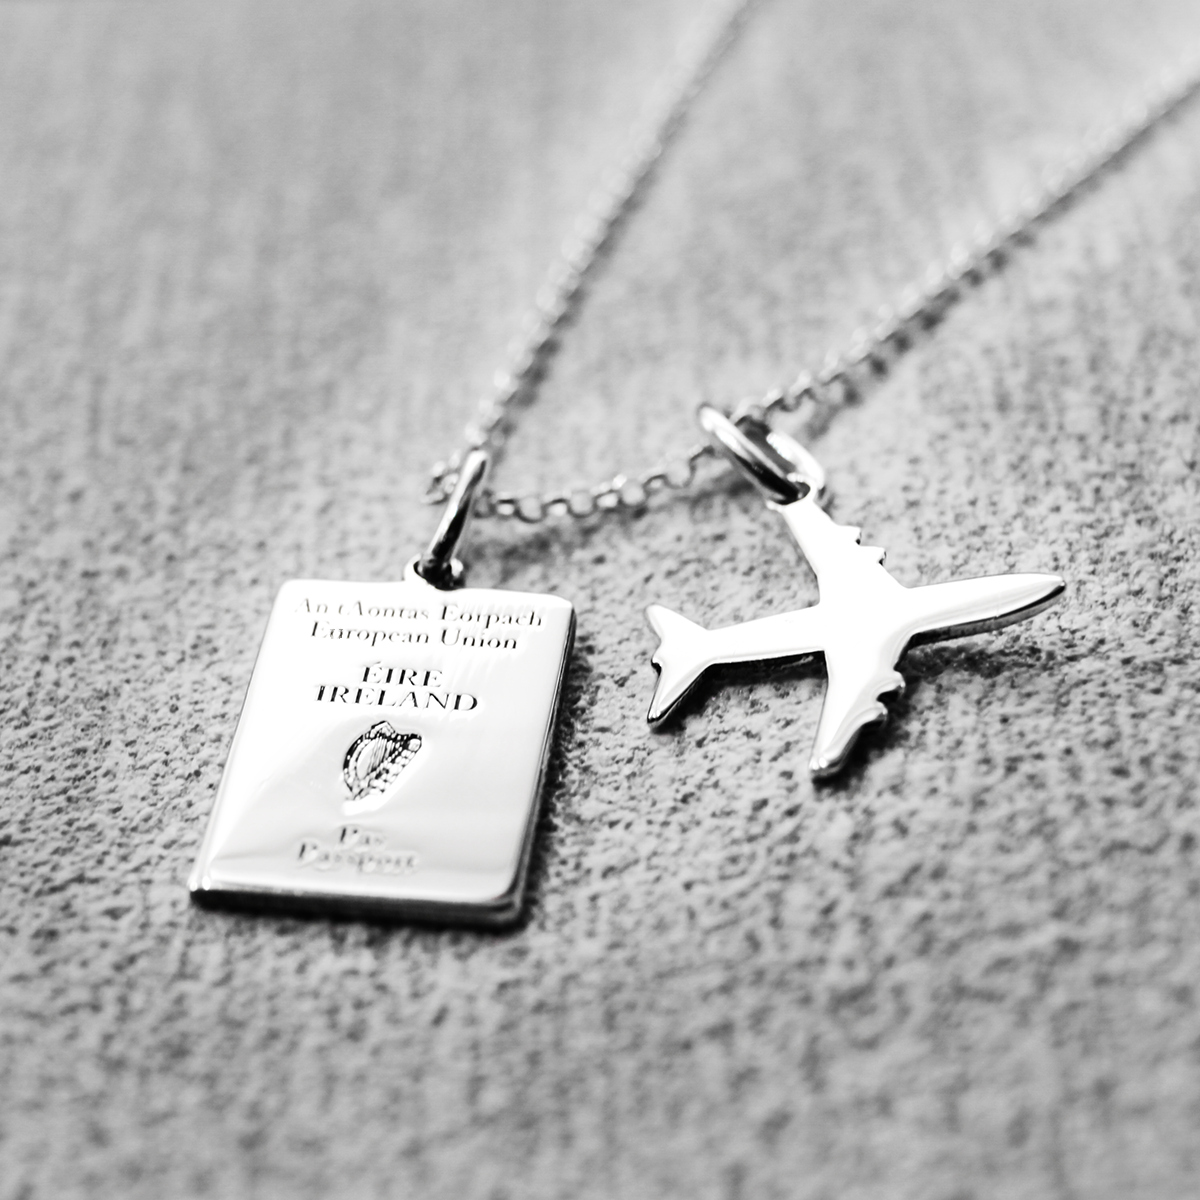 Irish Passport Replica Mini Silver Pendant with Mini Airplane Charm Pendant by Croí Kinsale Jewellery.  The passport measures 10 millimeters wide by 14 millimeters high, while the airplane charm measures 14 millimeters wide by 14 millimeters high. The bail fits up to a 2.5 mm chain, offering versatility for different chain sizes. Whether you gift it to a wanderer or keep it as a timeless heirloom, this pendant is a symbol of Irish pride and wanderlust. Irish souvenir